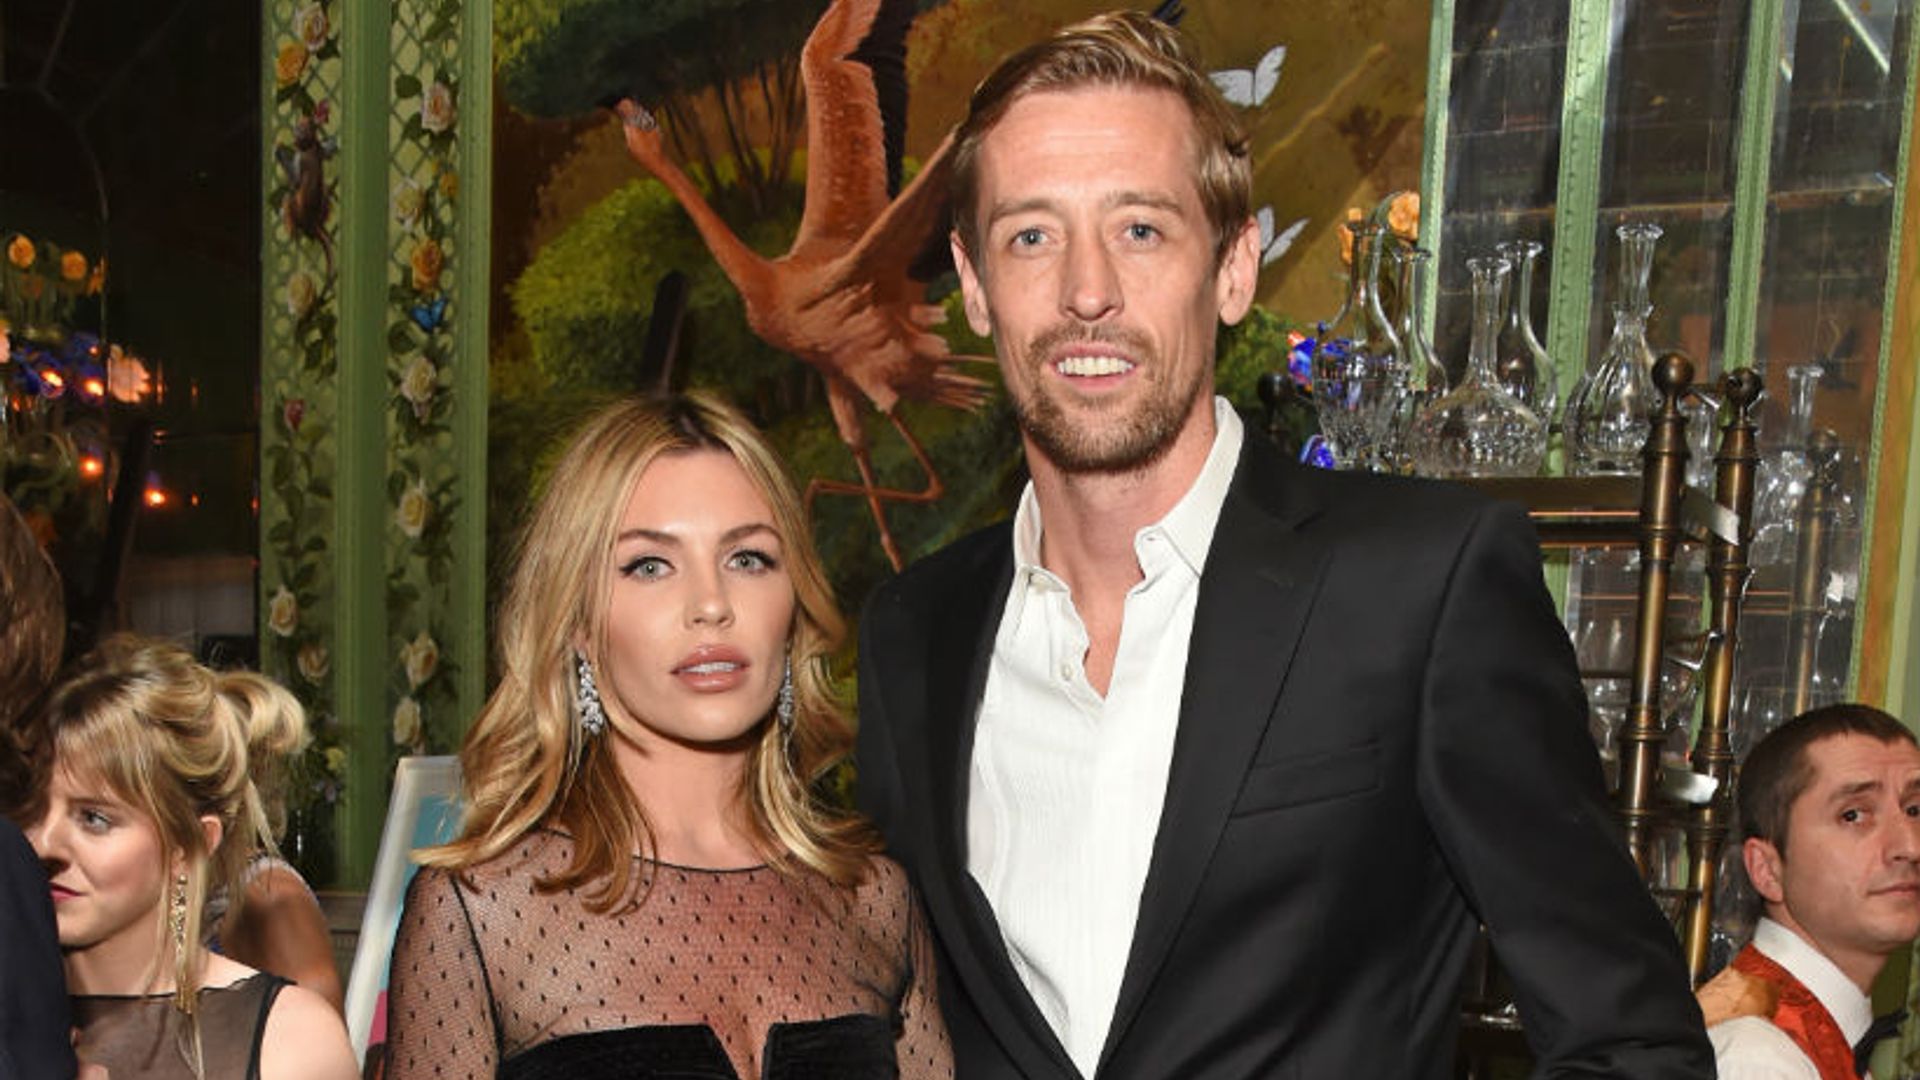 Exclusive: How Peter Crouch reacted to Prince Harry's cheeky comment about Abbey Clancy – and it may surprise you